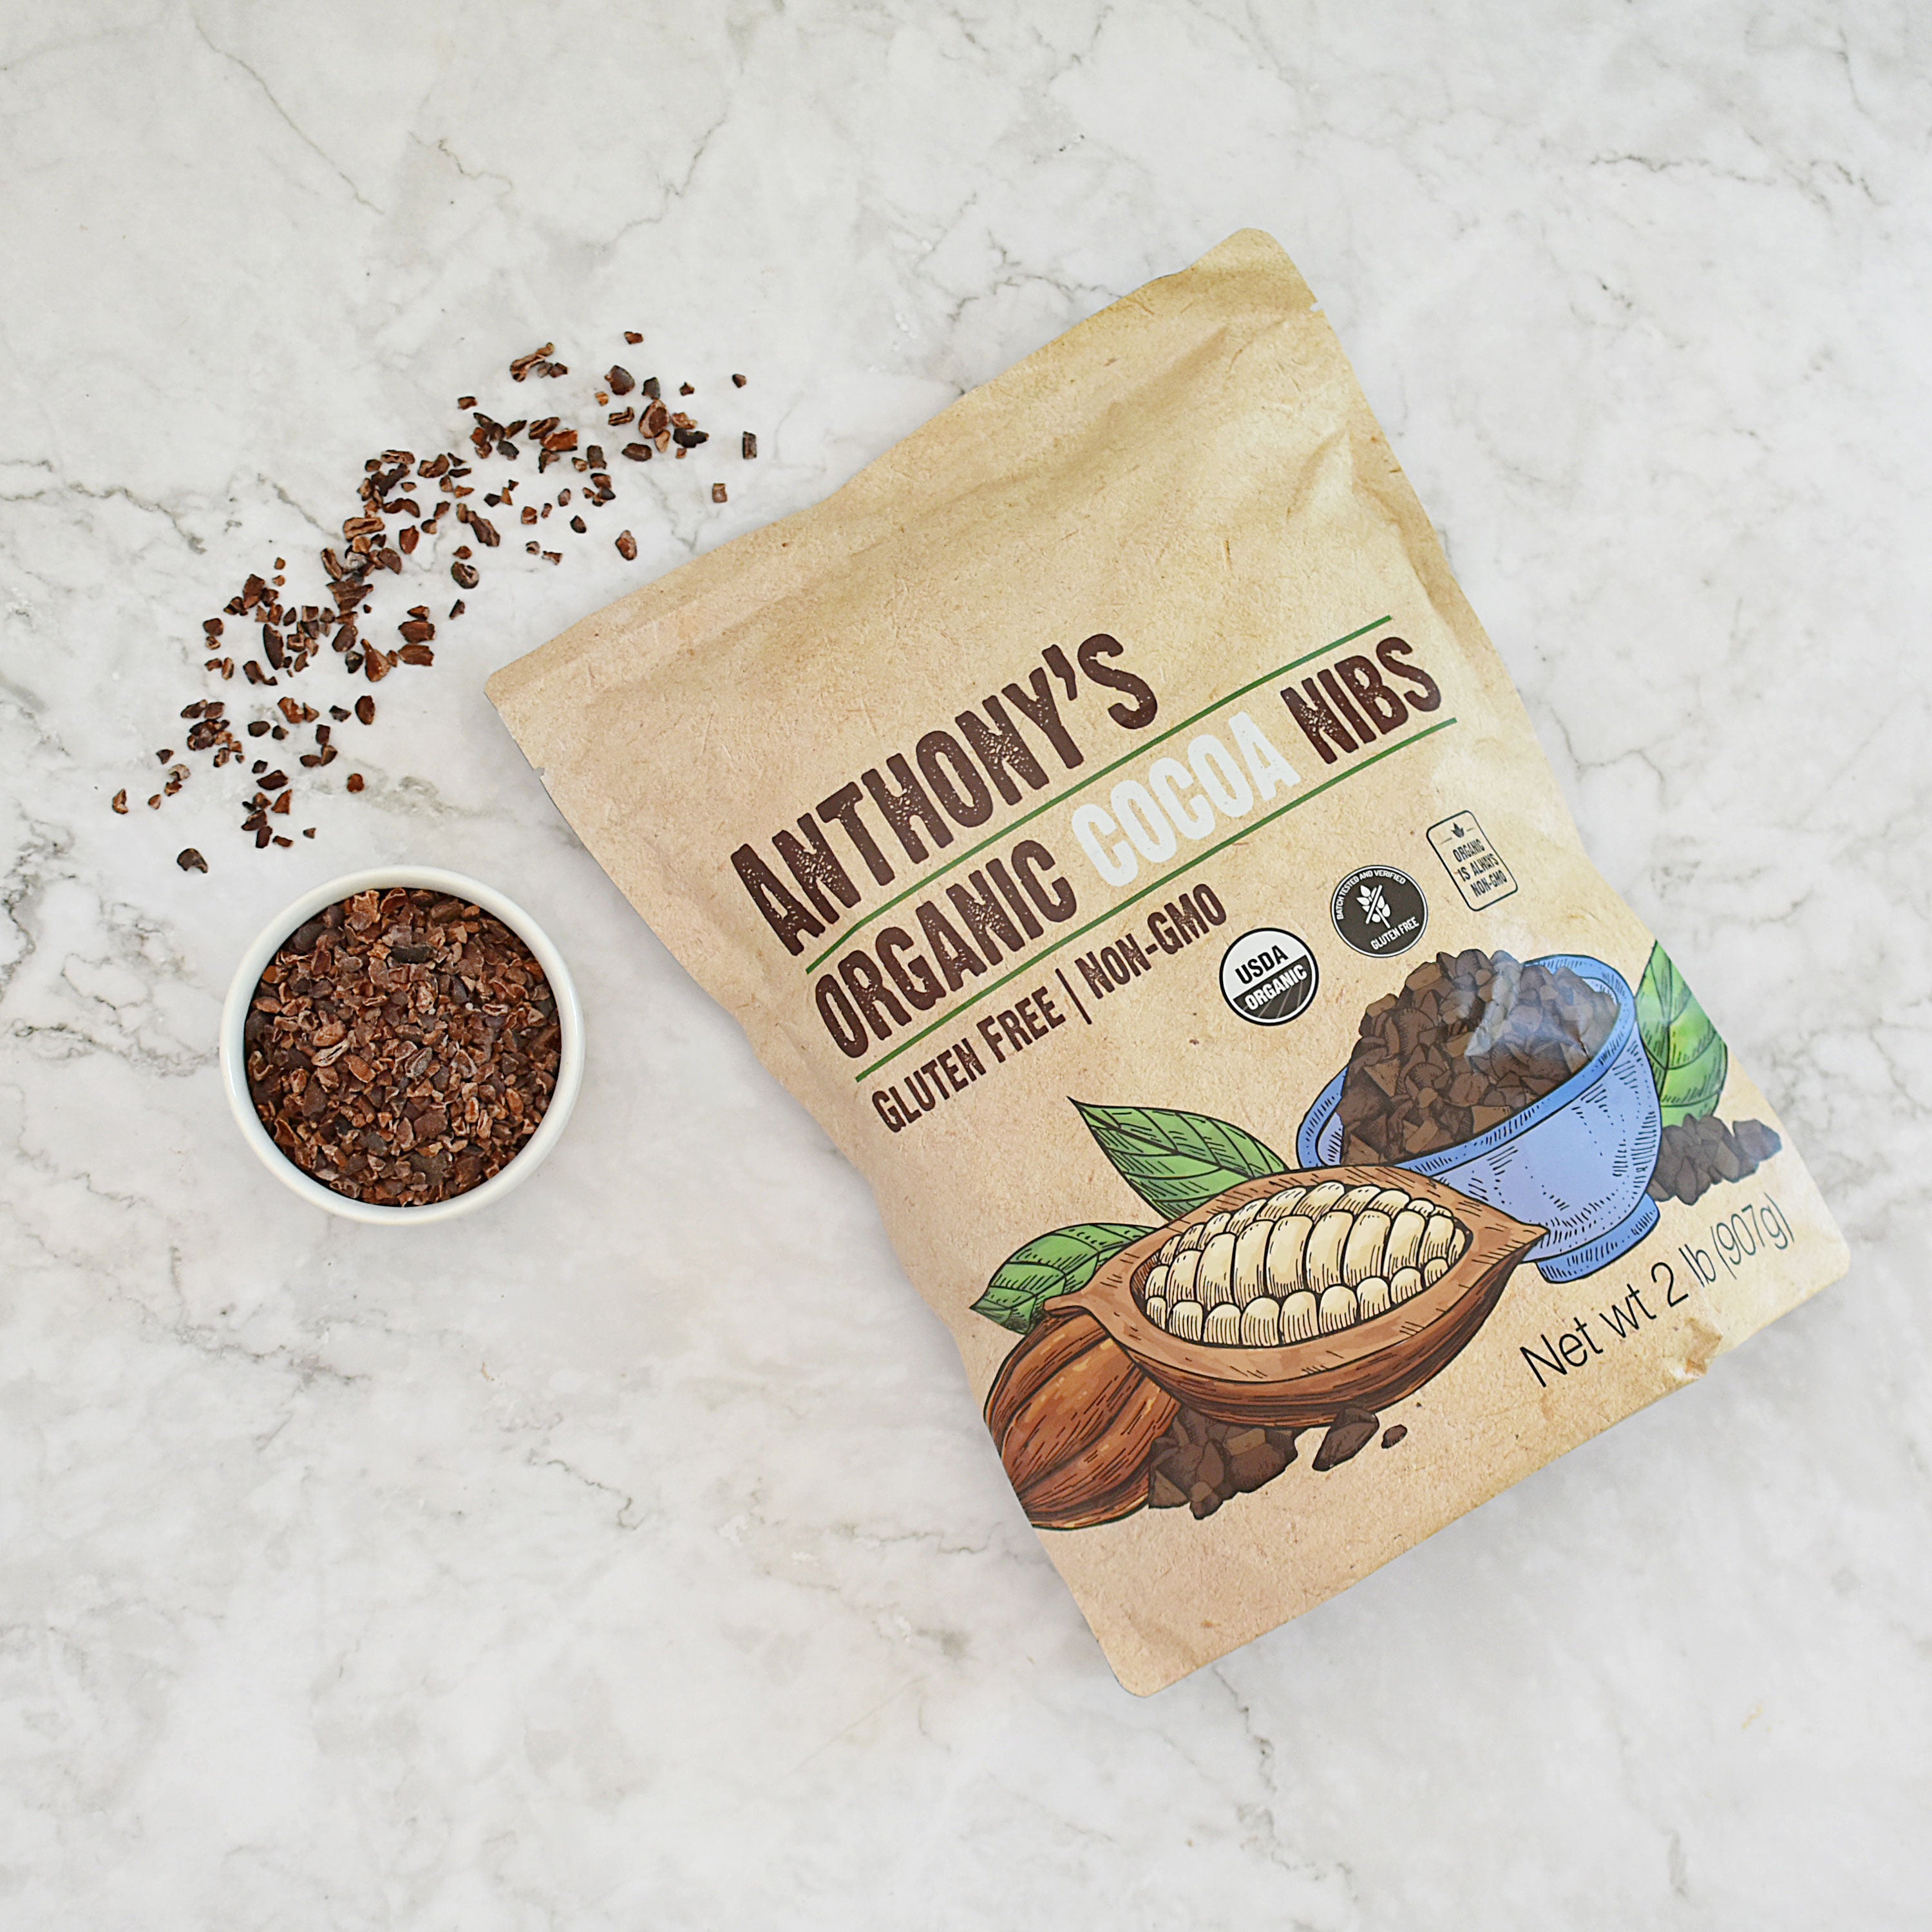 Organic Cocoa Nibs: Batch Tested and Verified Gluten Free